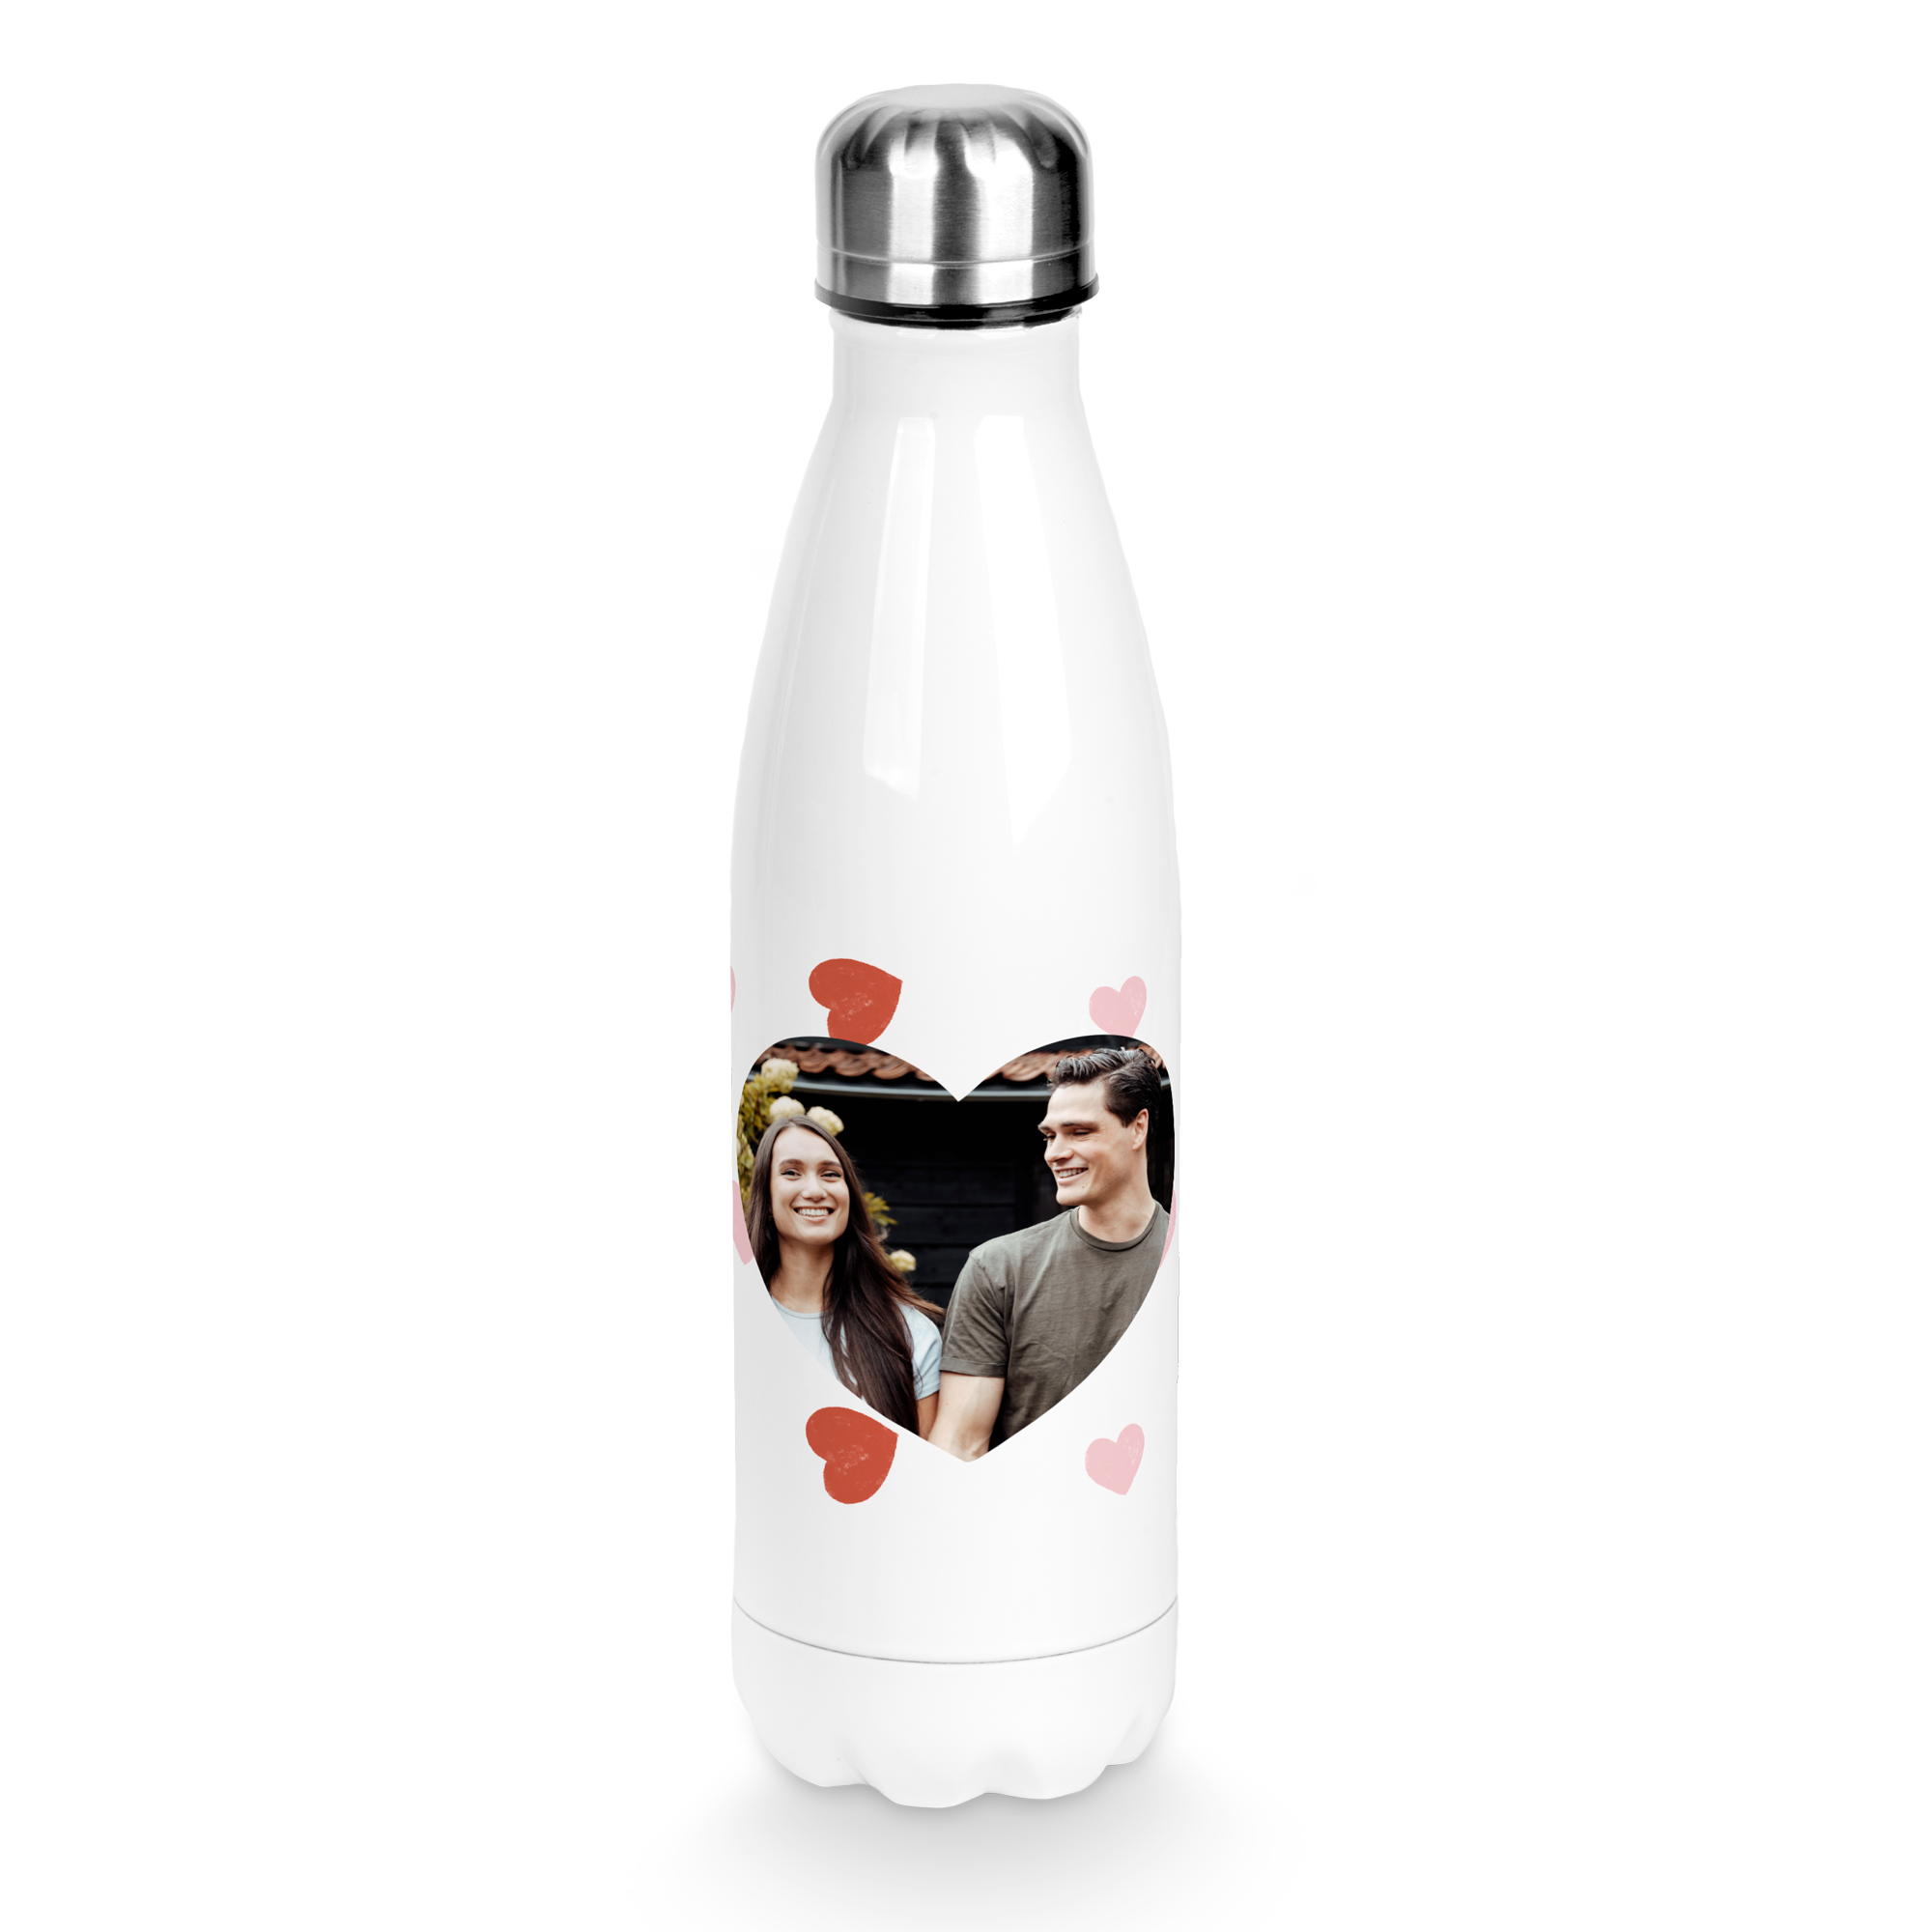 Personalised insulated water bottle - White